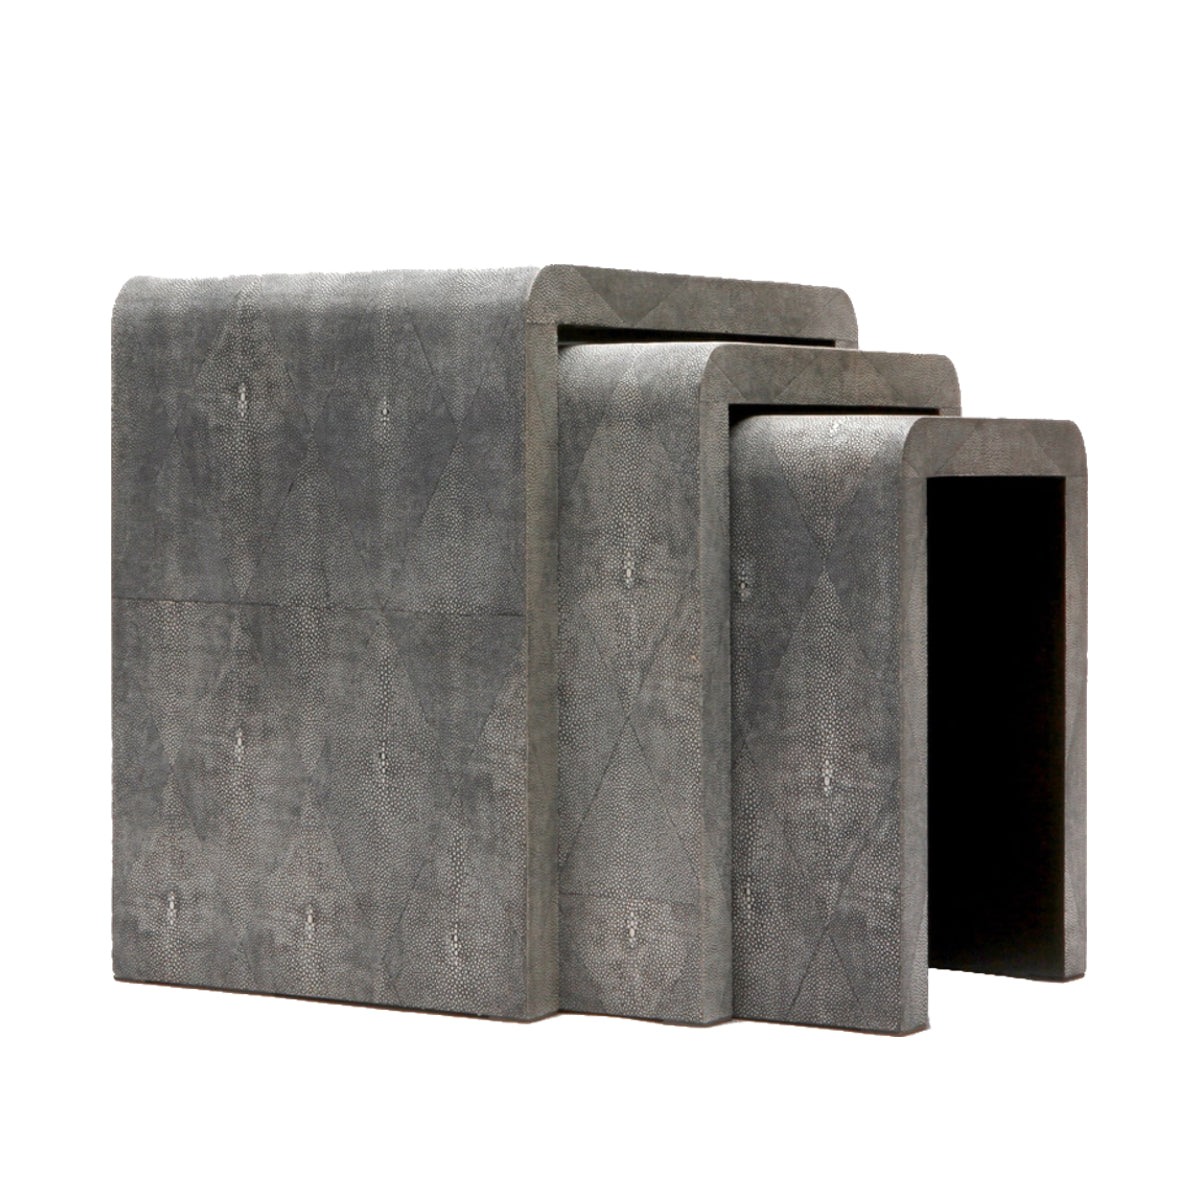 Harlow Nesting Tables - Cool Gray